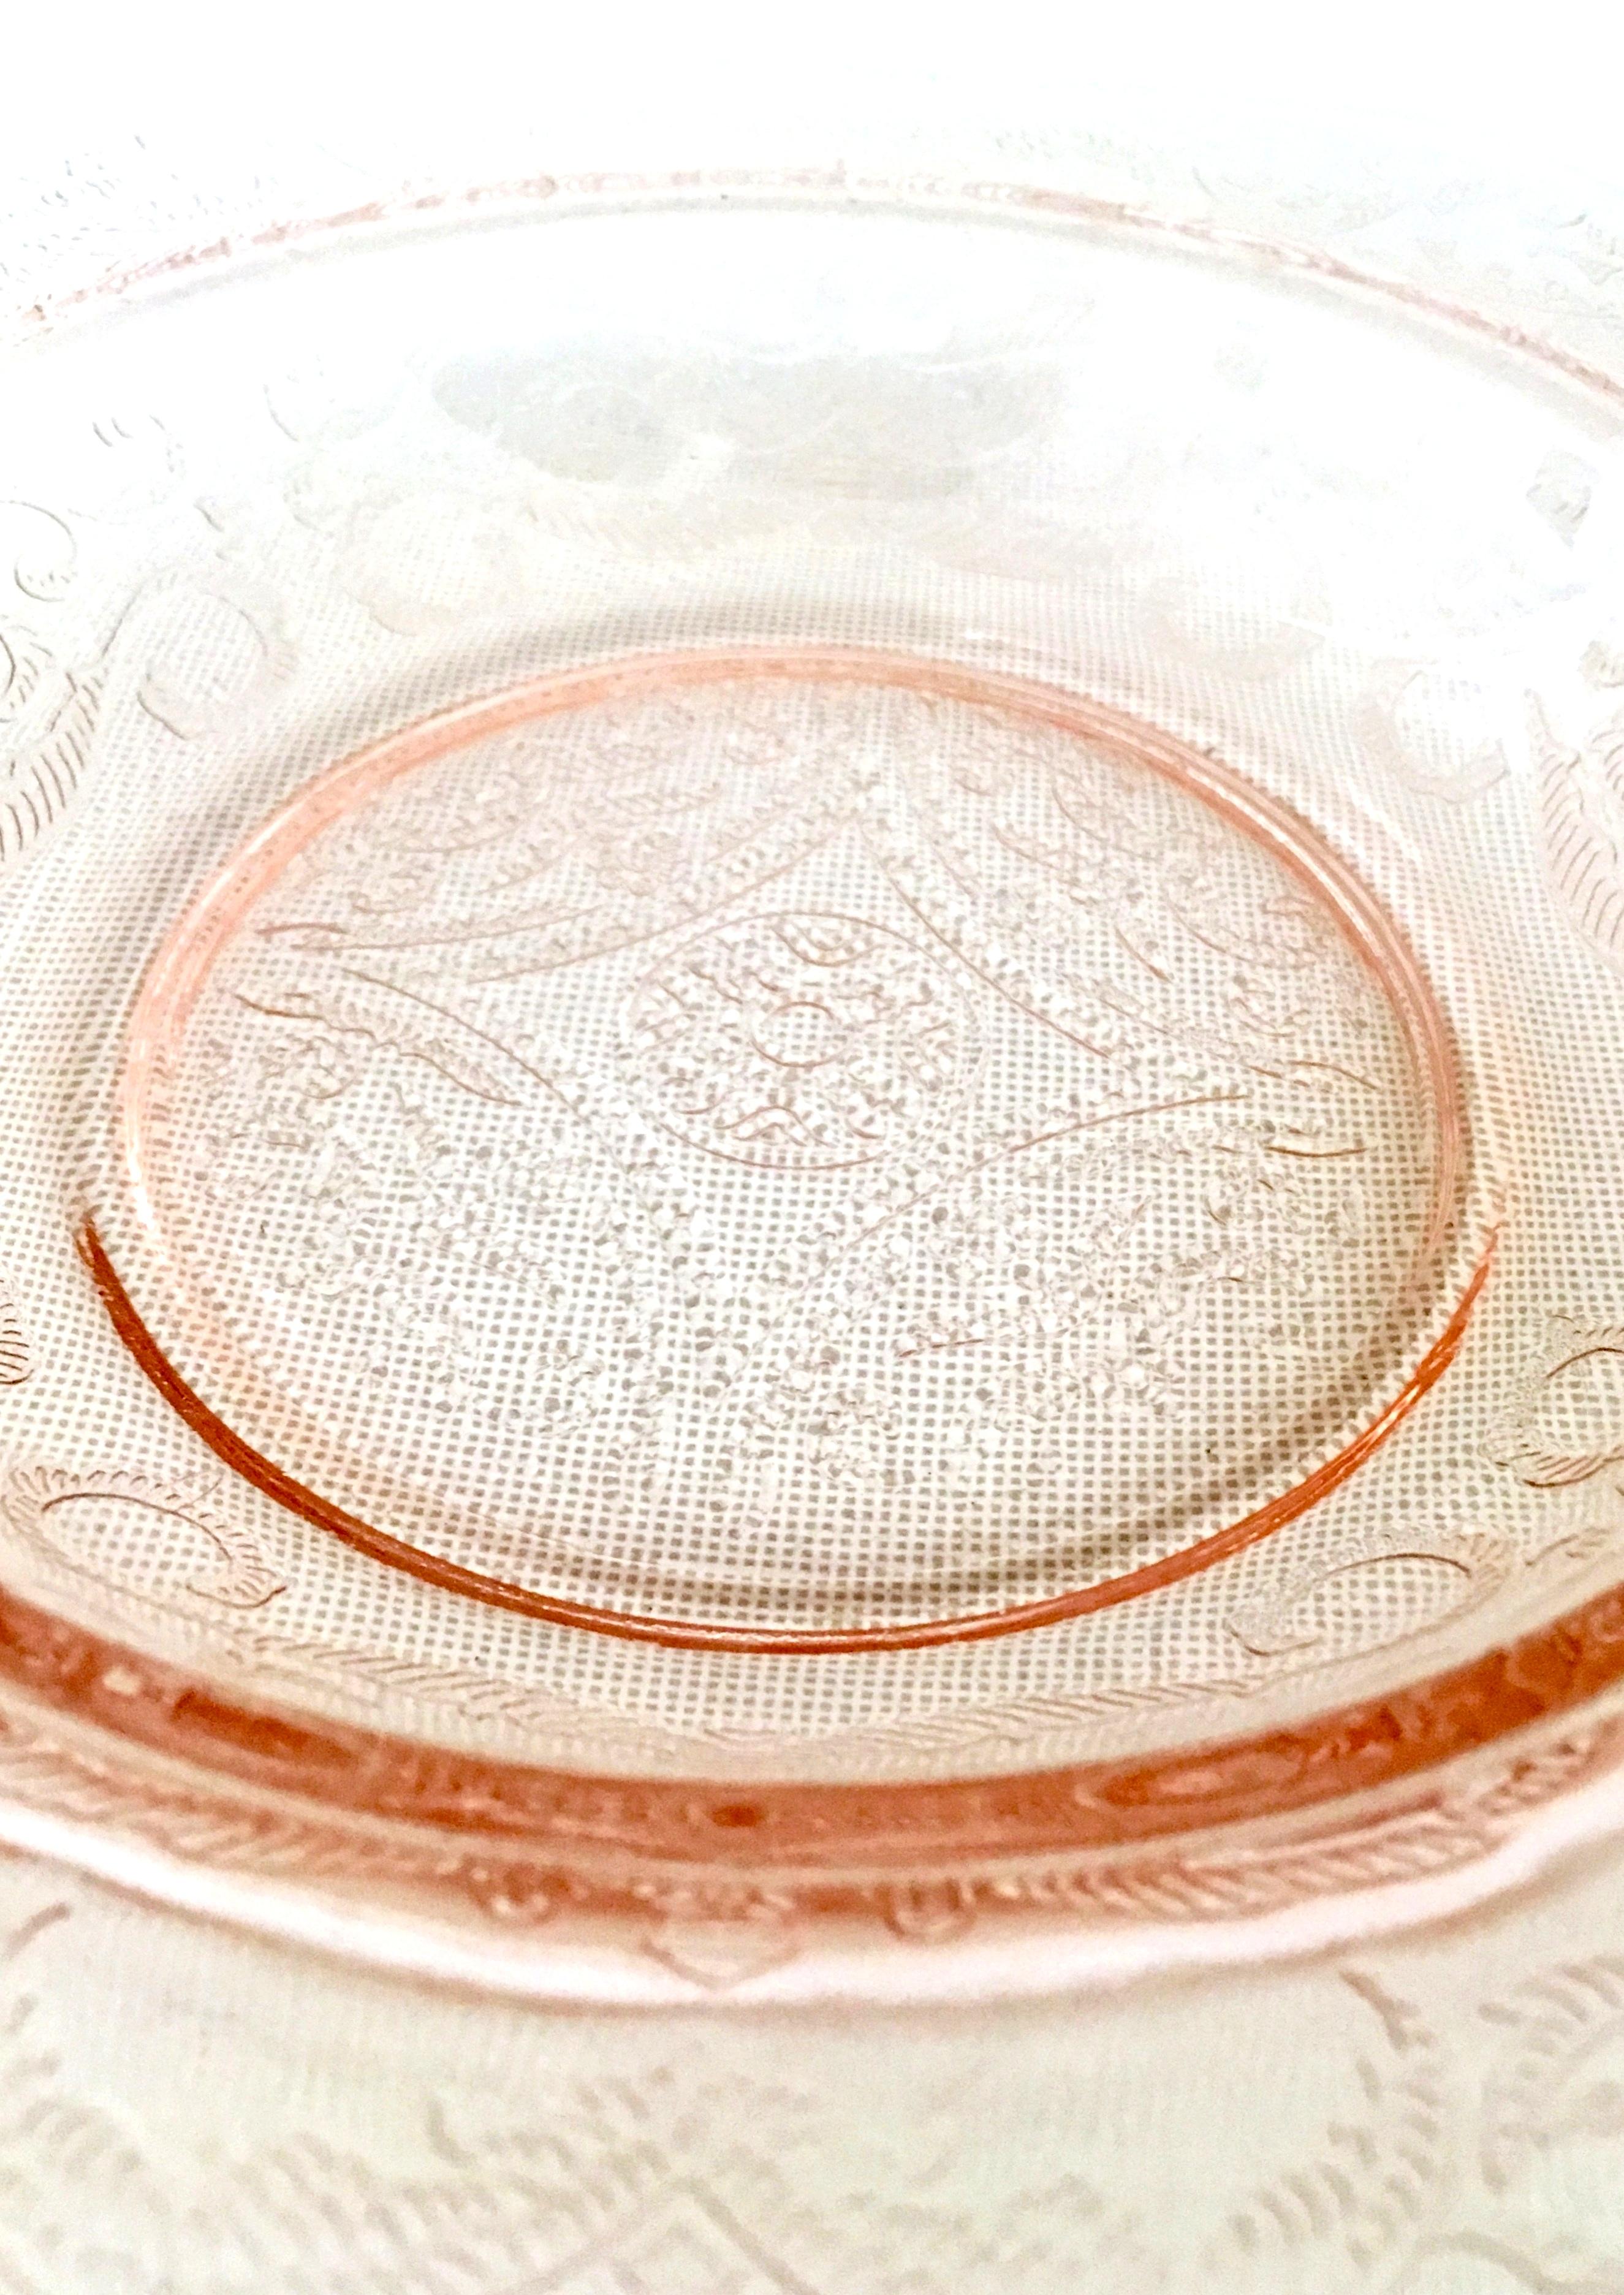 Antique American Pink Depression Glass Square and Round Covered Bowl 1